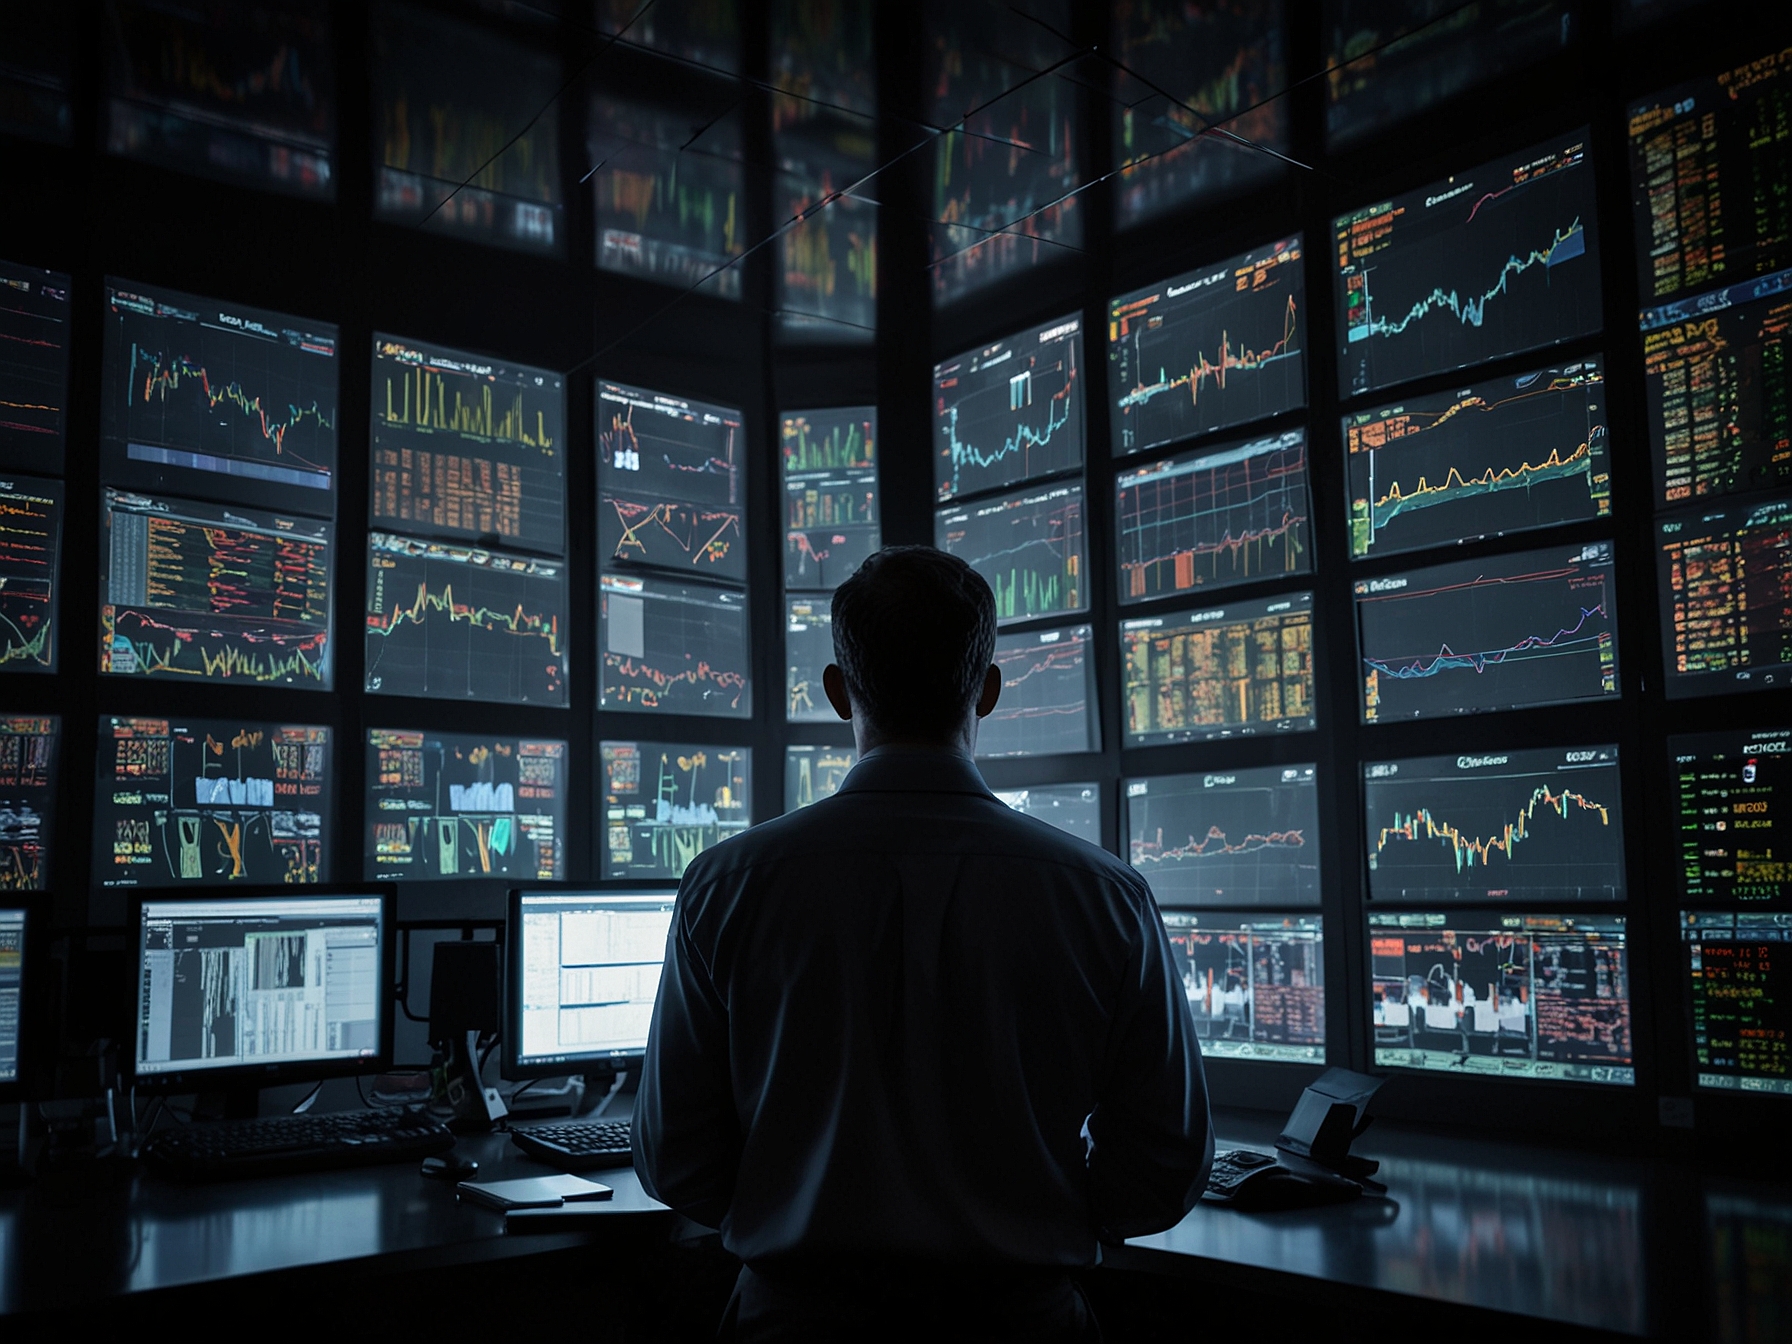 Traders on a stock market floor watching multiple screens showing various global indices. The scene reflects the cautious sentiment and anticipation among investors regarding upcoming inflation figures.